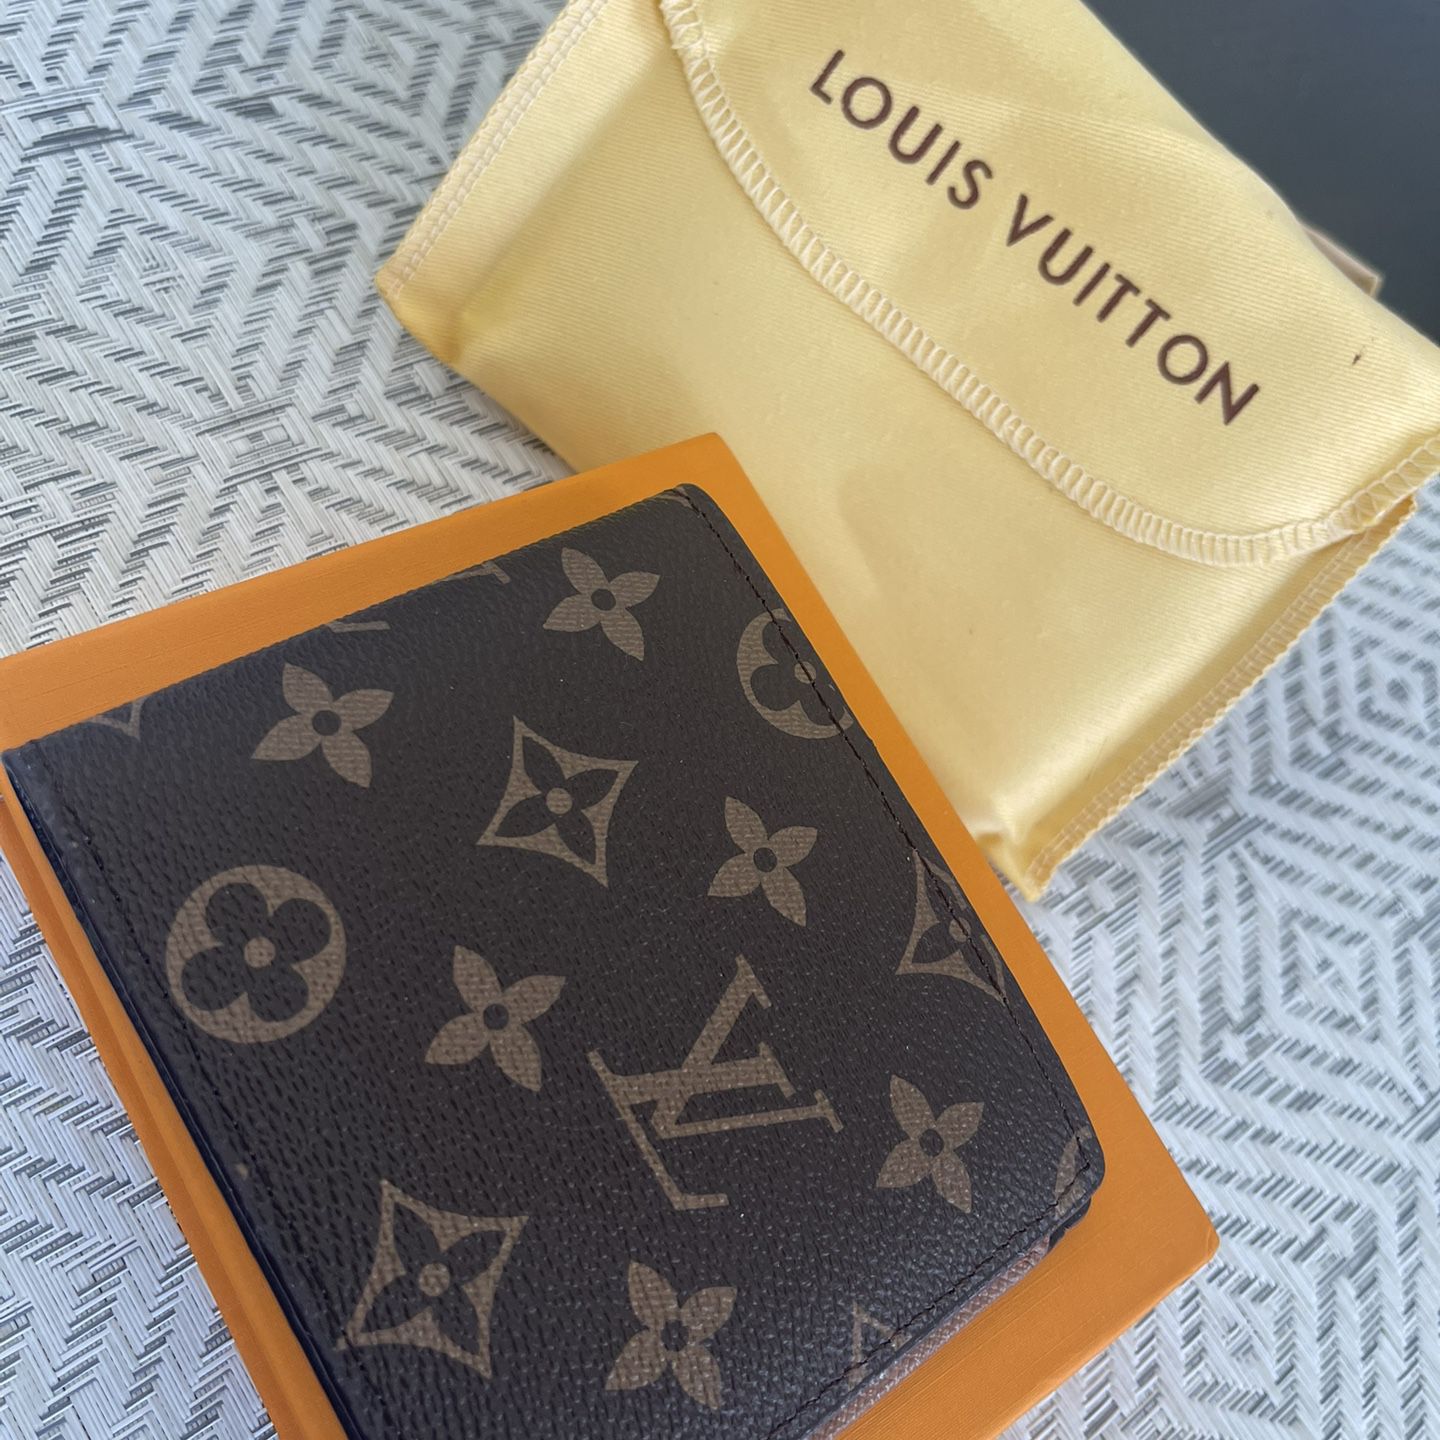 Authentic Lv wallet date code SD 0187 for Sale in Oakland, CA - OfferUp